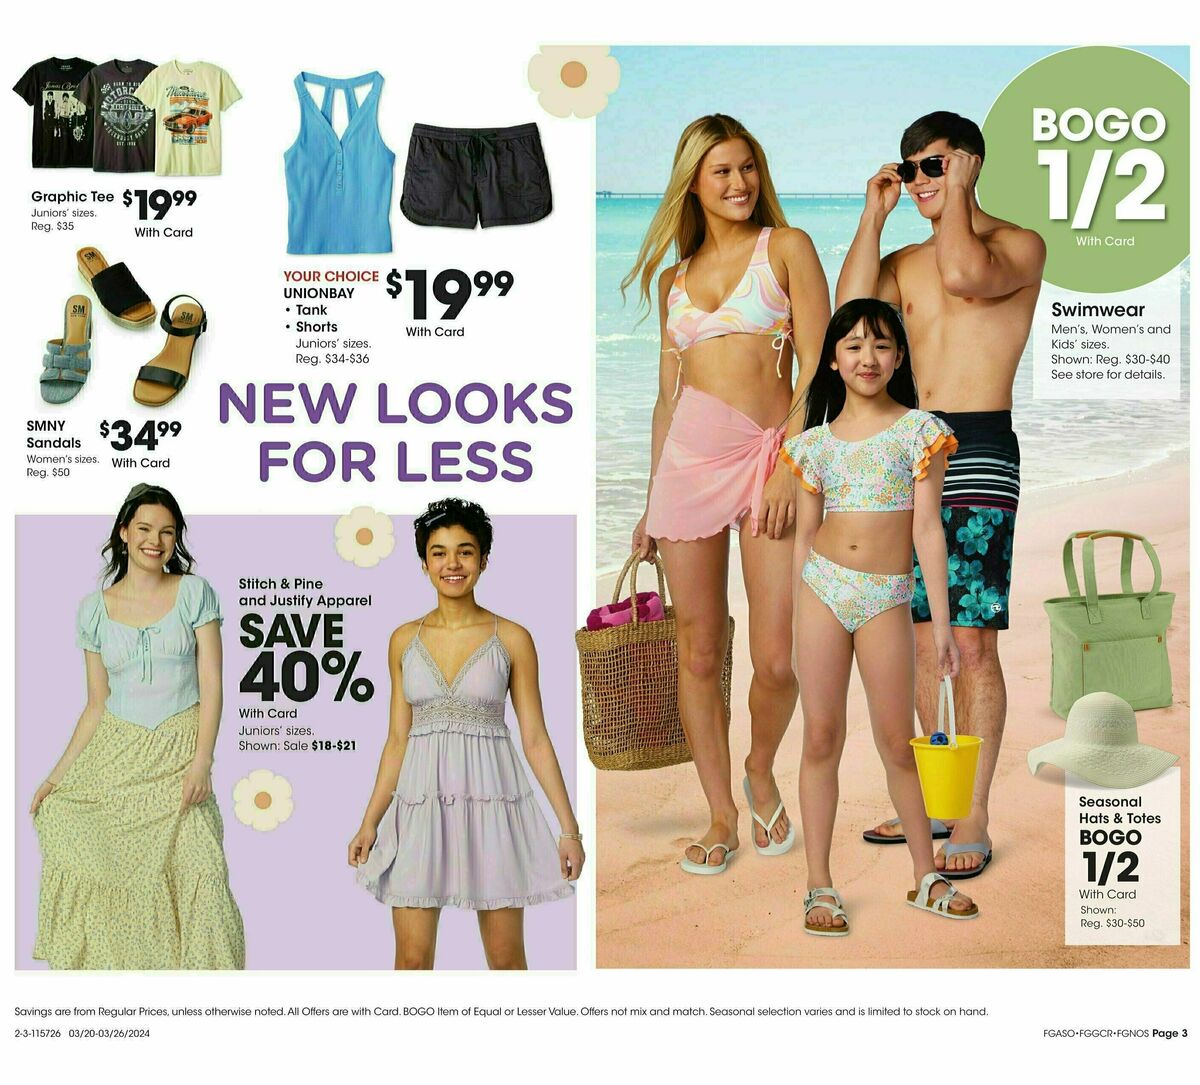 Fred Meyer General Merchandise Weekly Ad from March 20